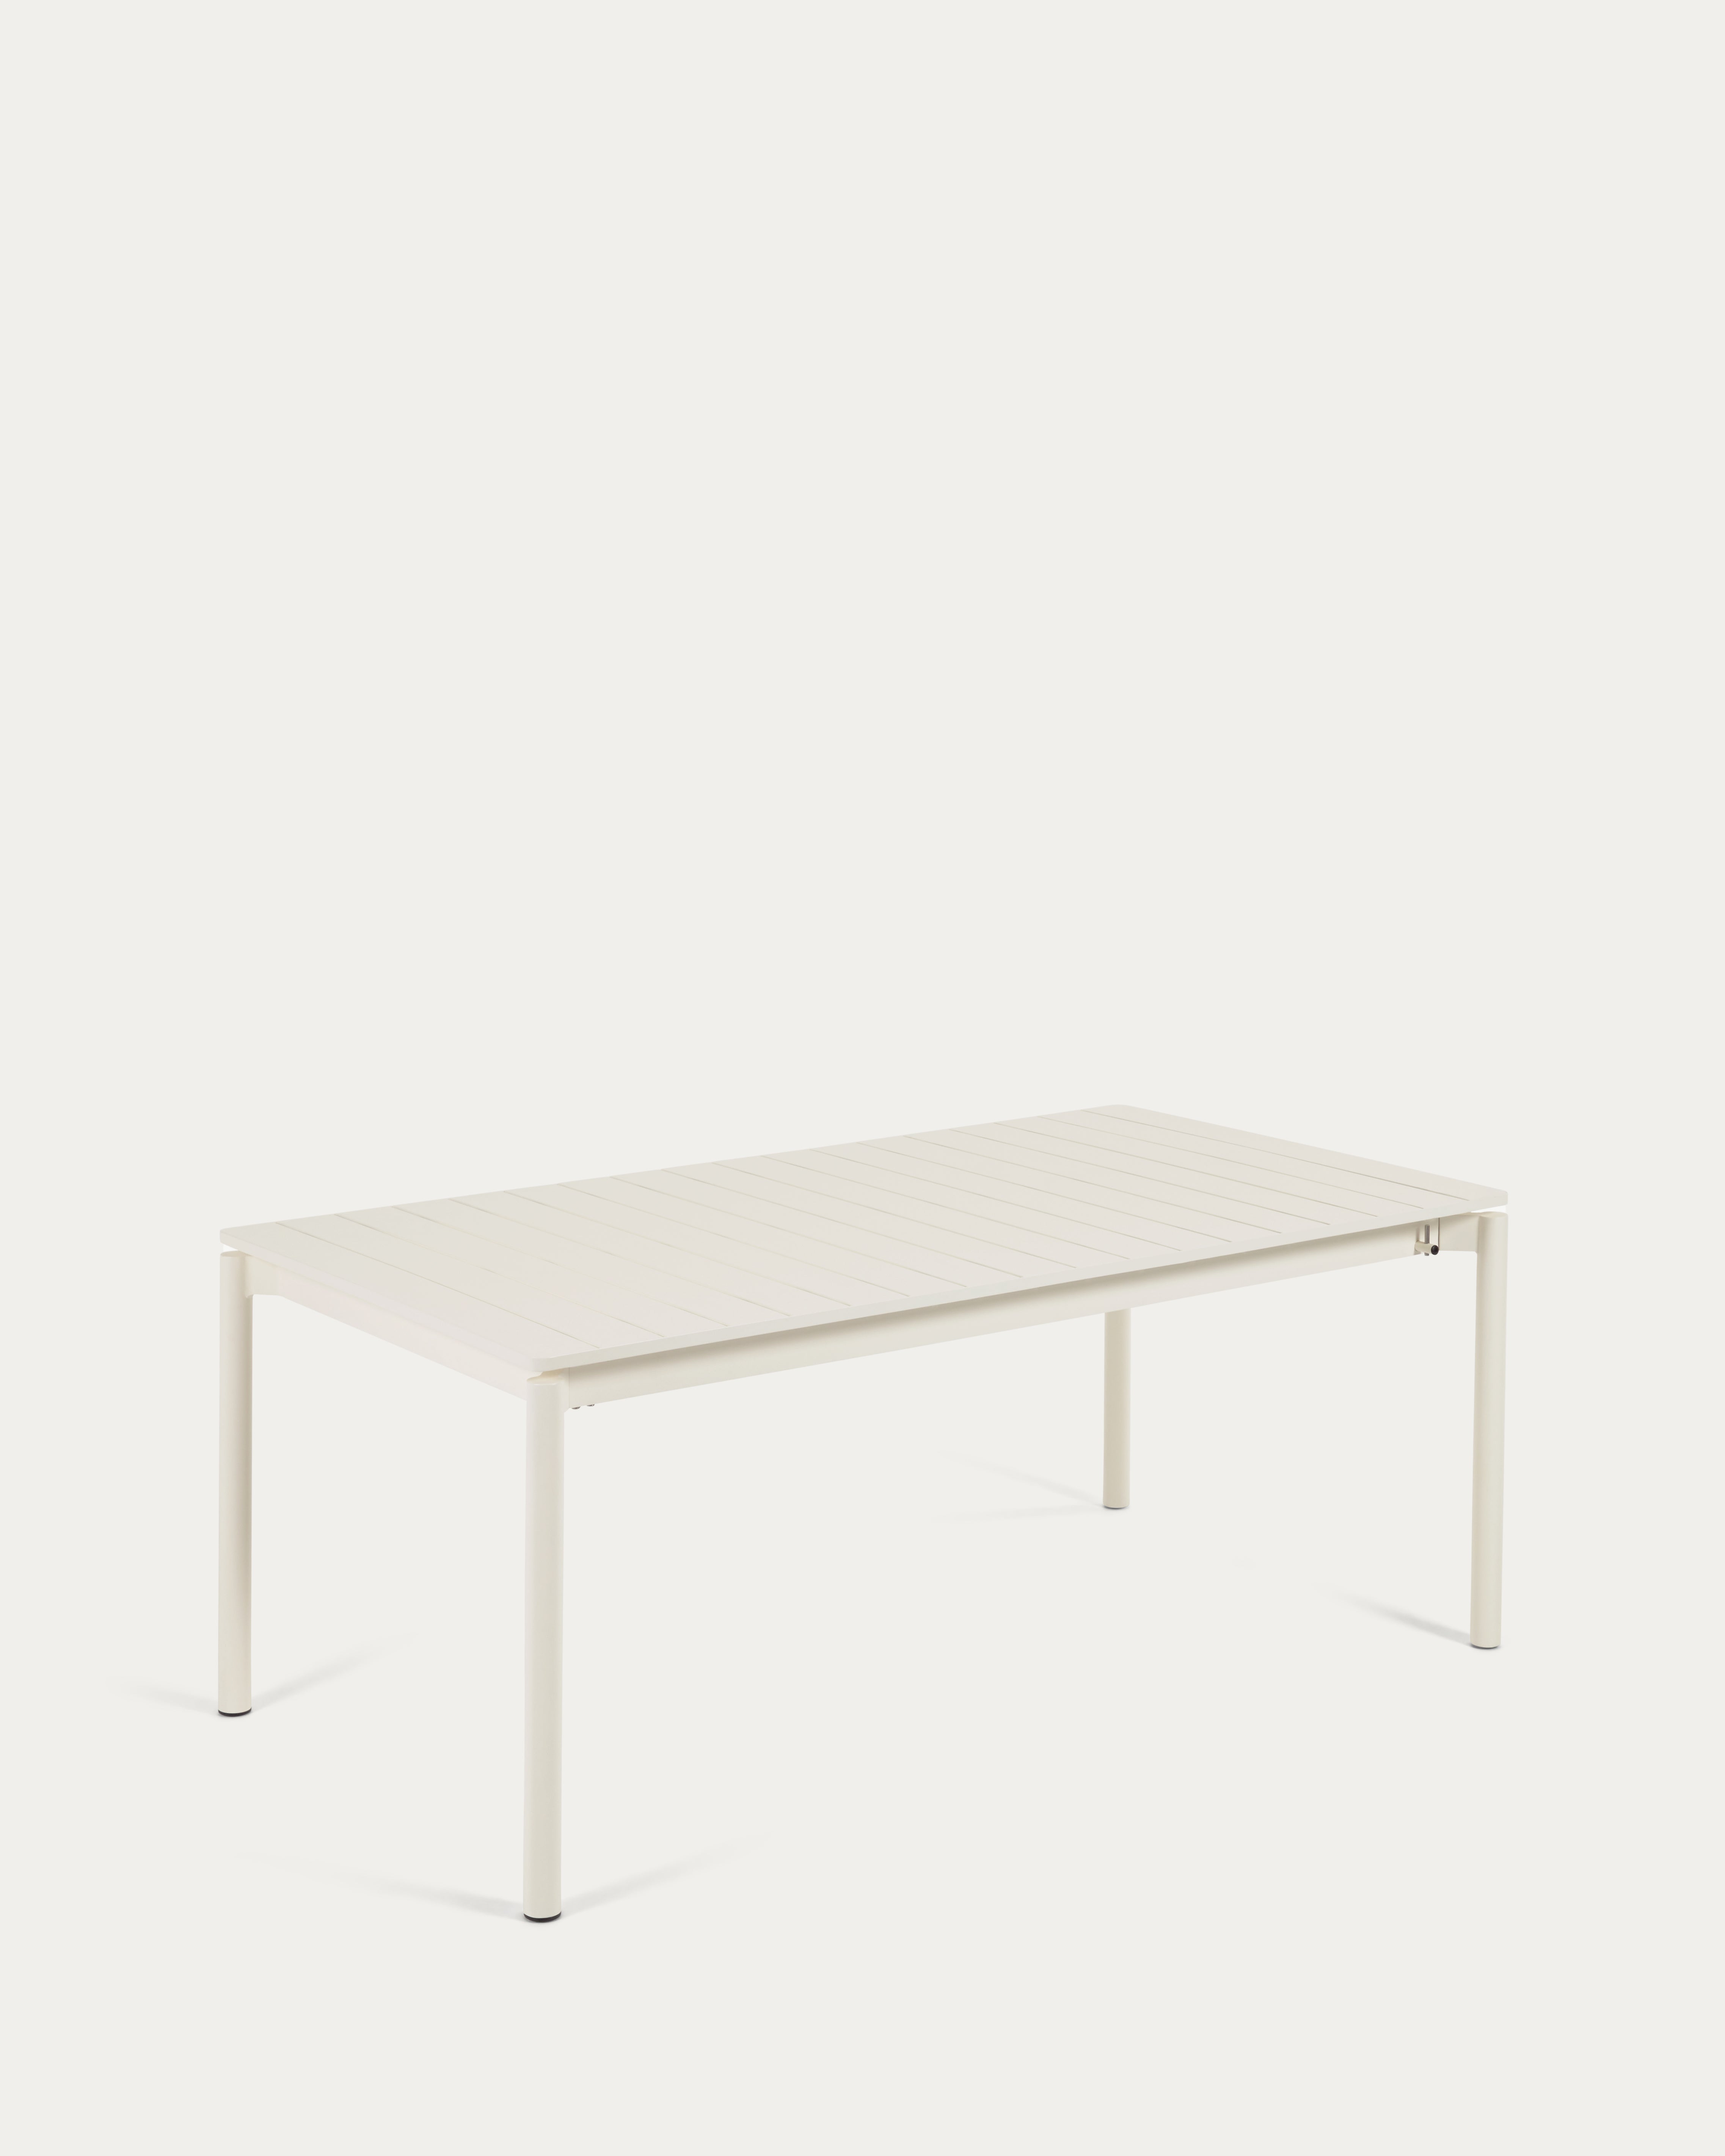 Zaltana extendable outdoor table in aluminum with raw finish, 180 (240) x 100 cm